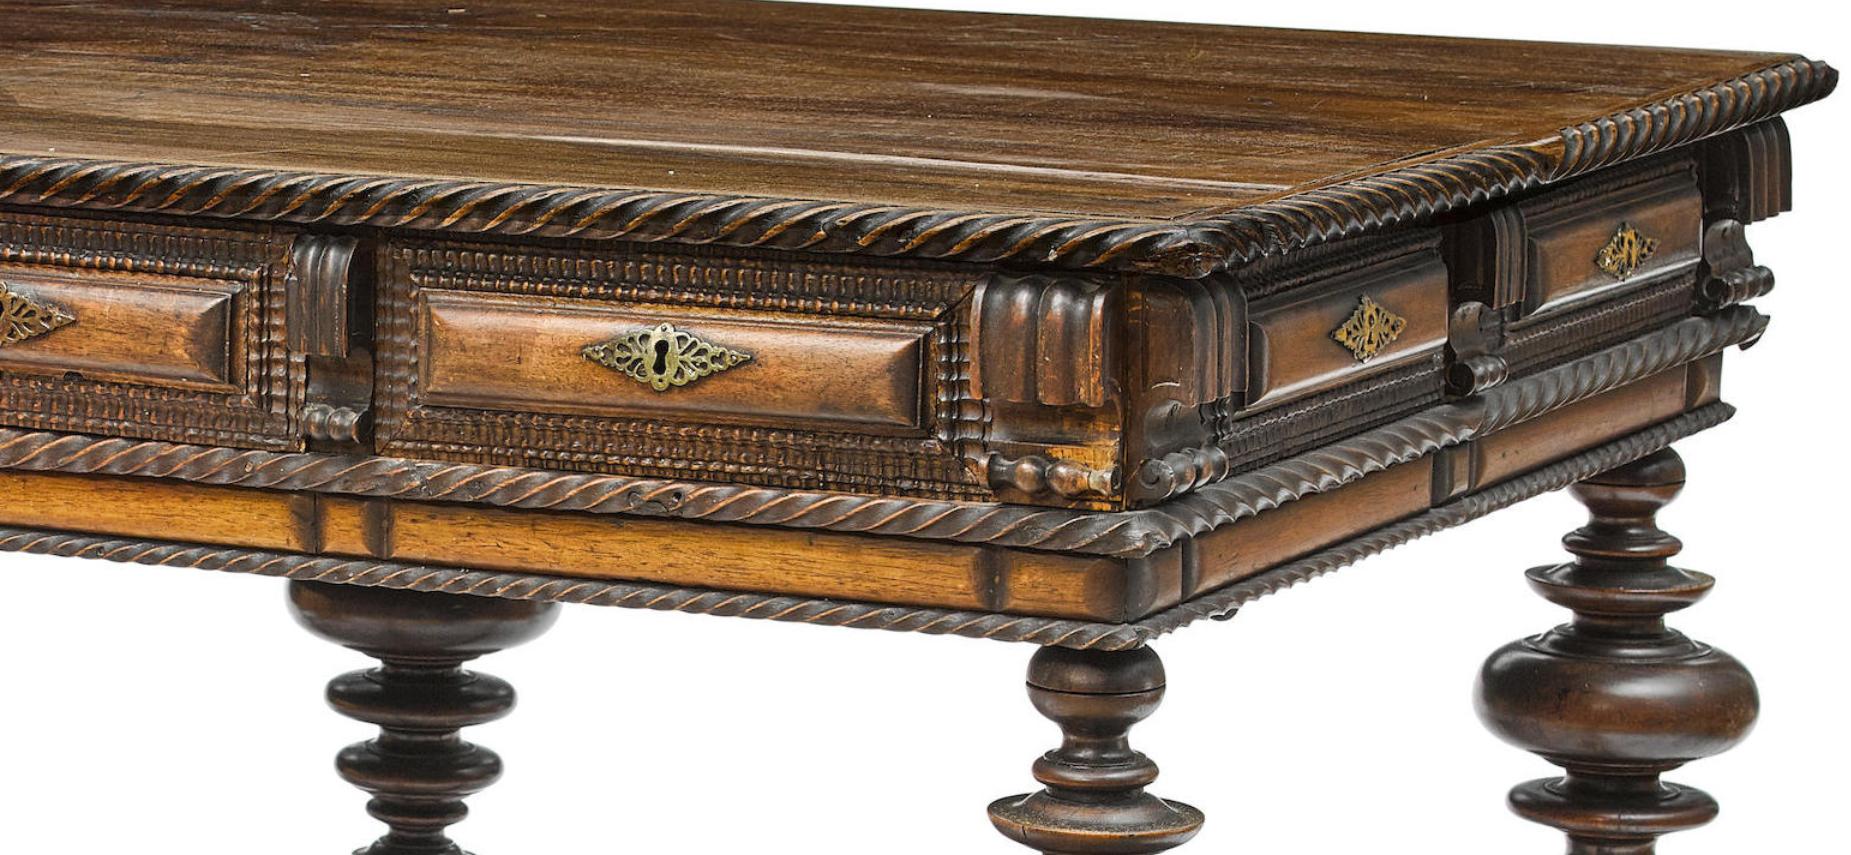 Baroque Portuguese Carved Center Table, Late 18th Century